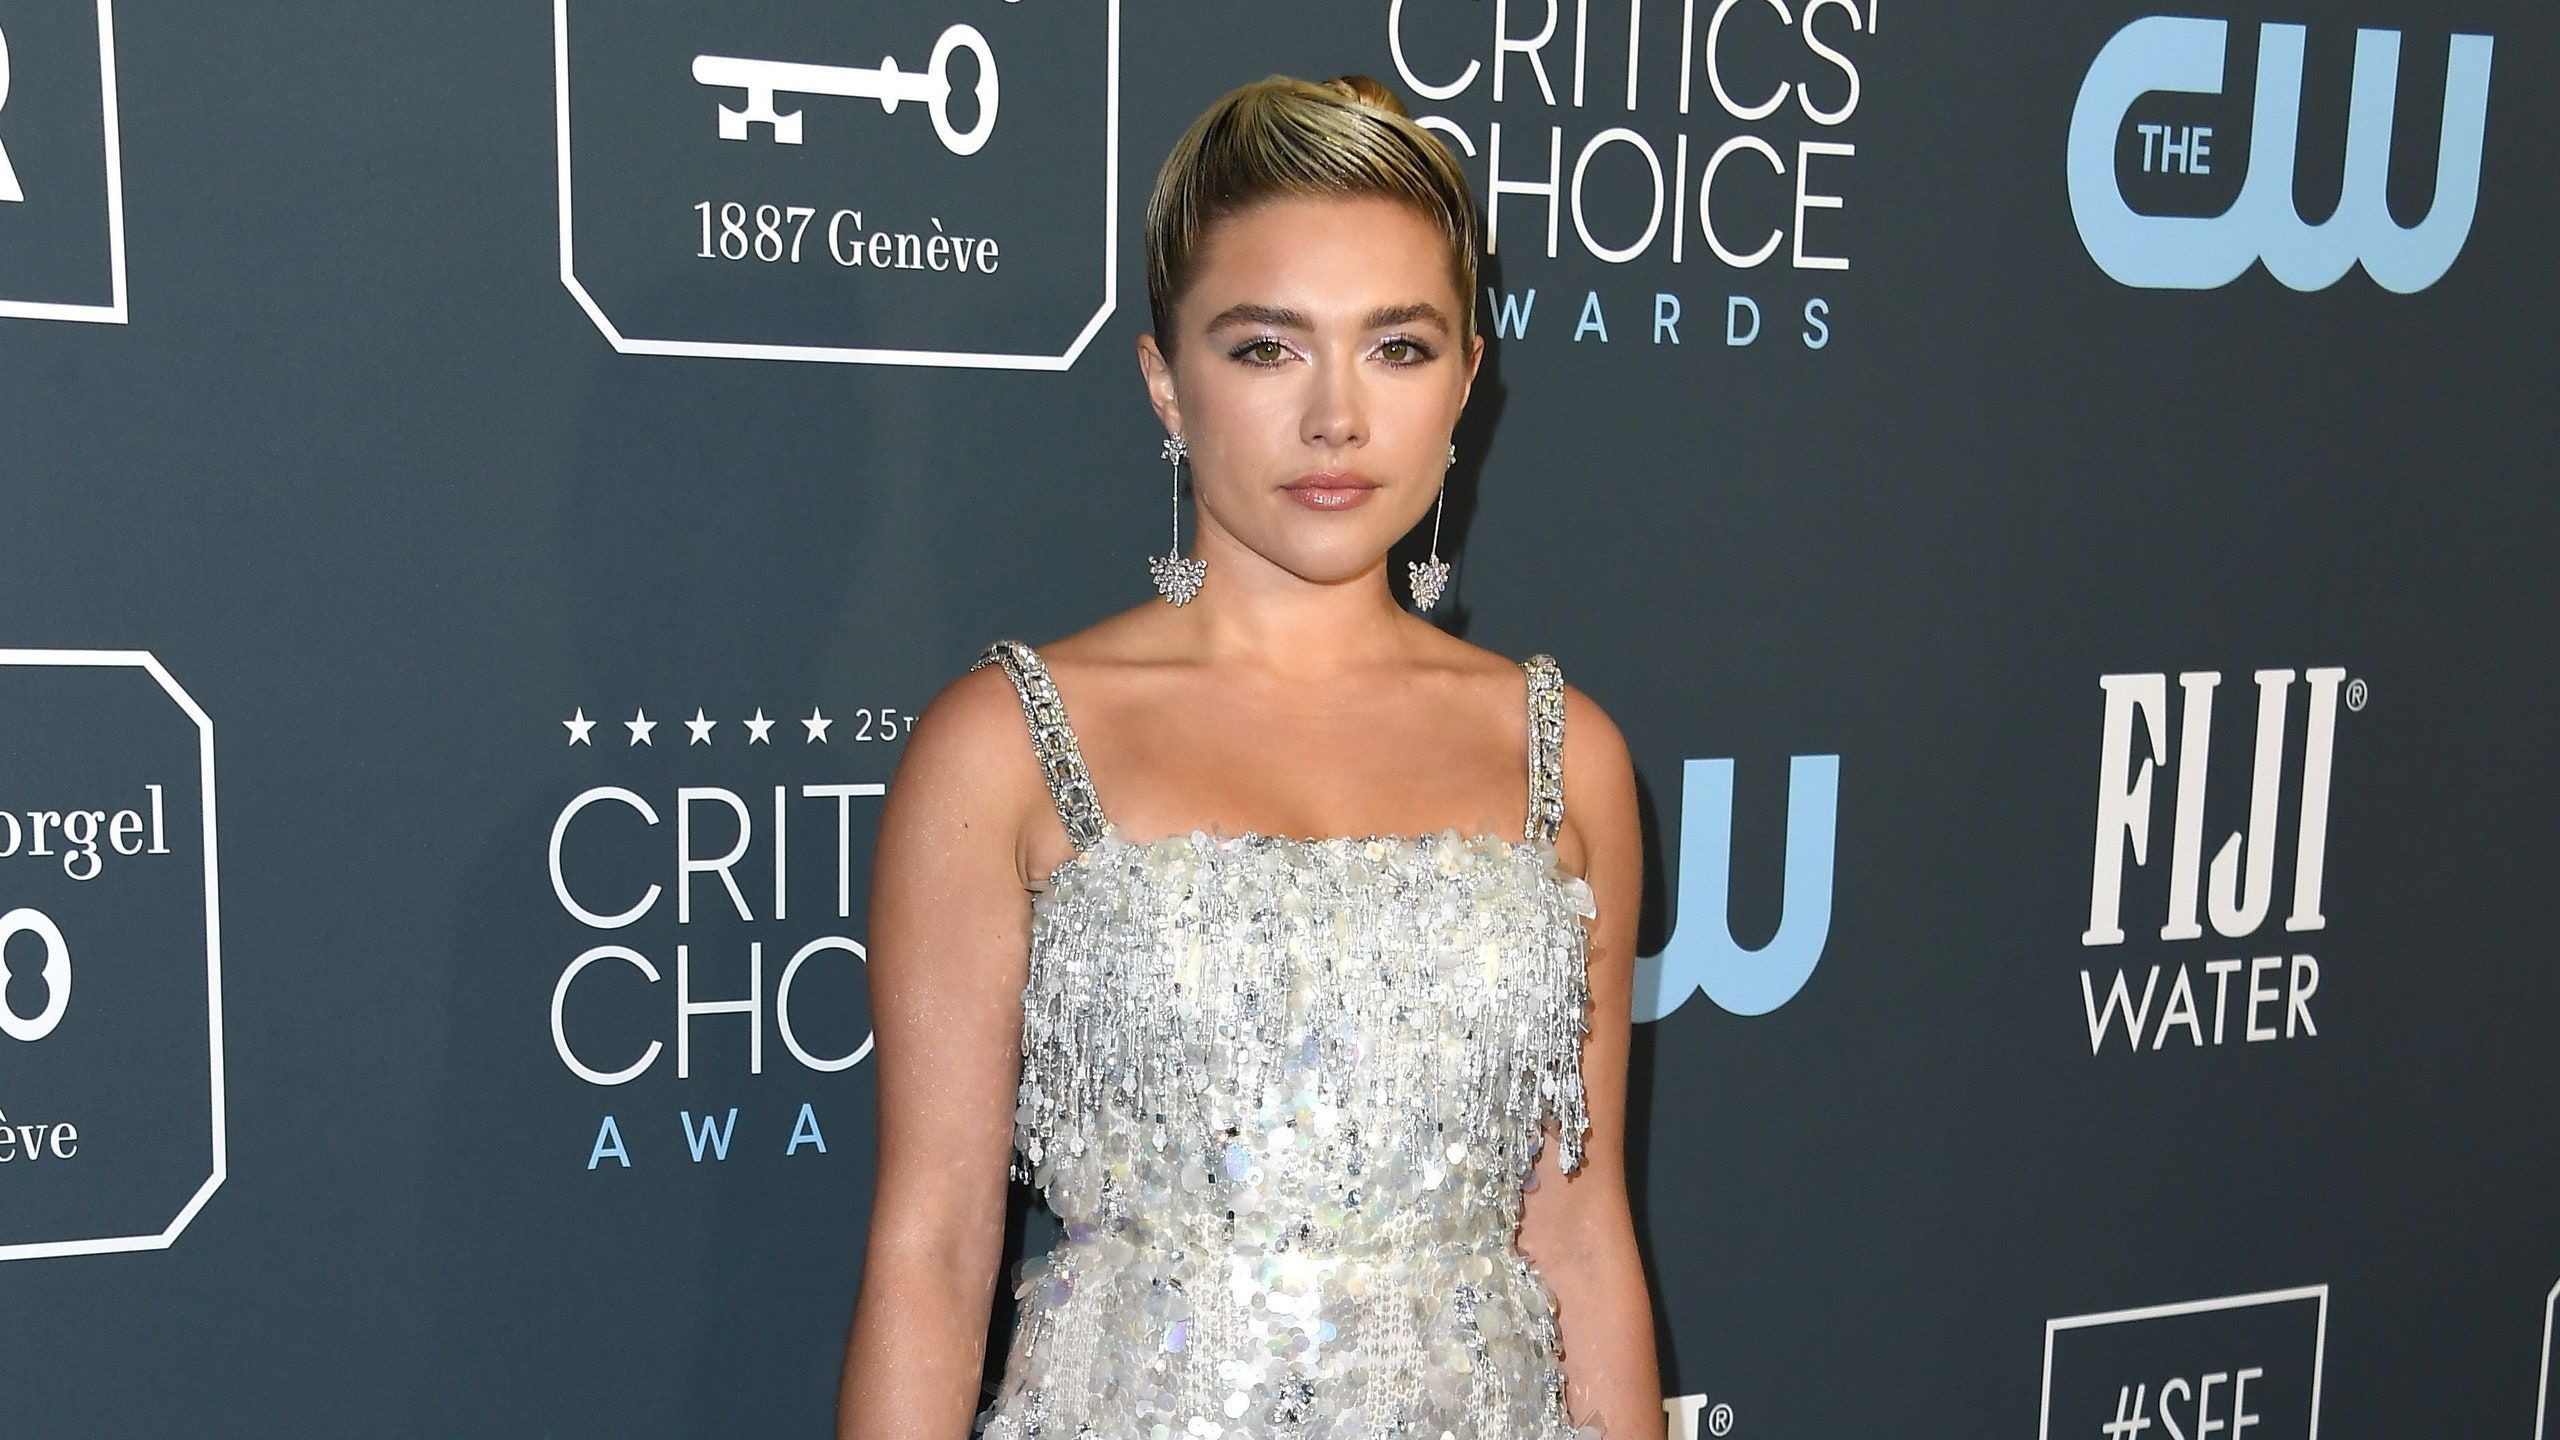 Florence Pugh wears a silver gown to the Critics' Choice Awards - Florence Pugh